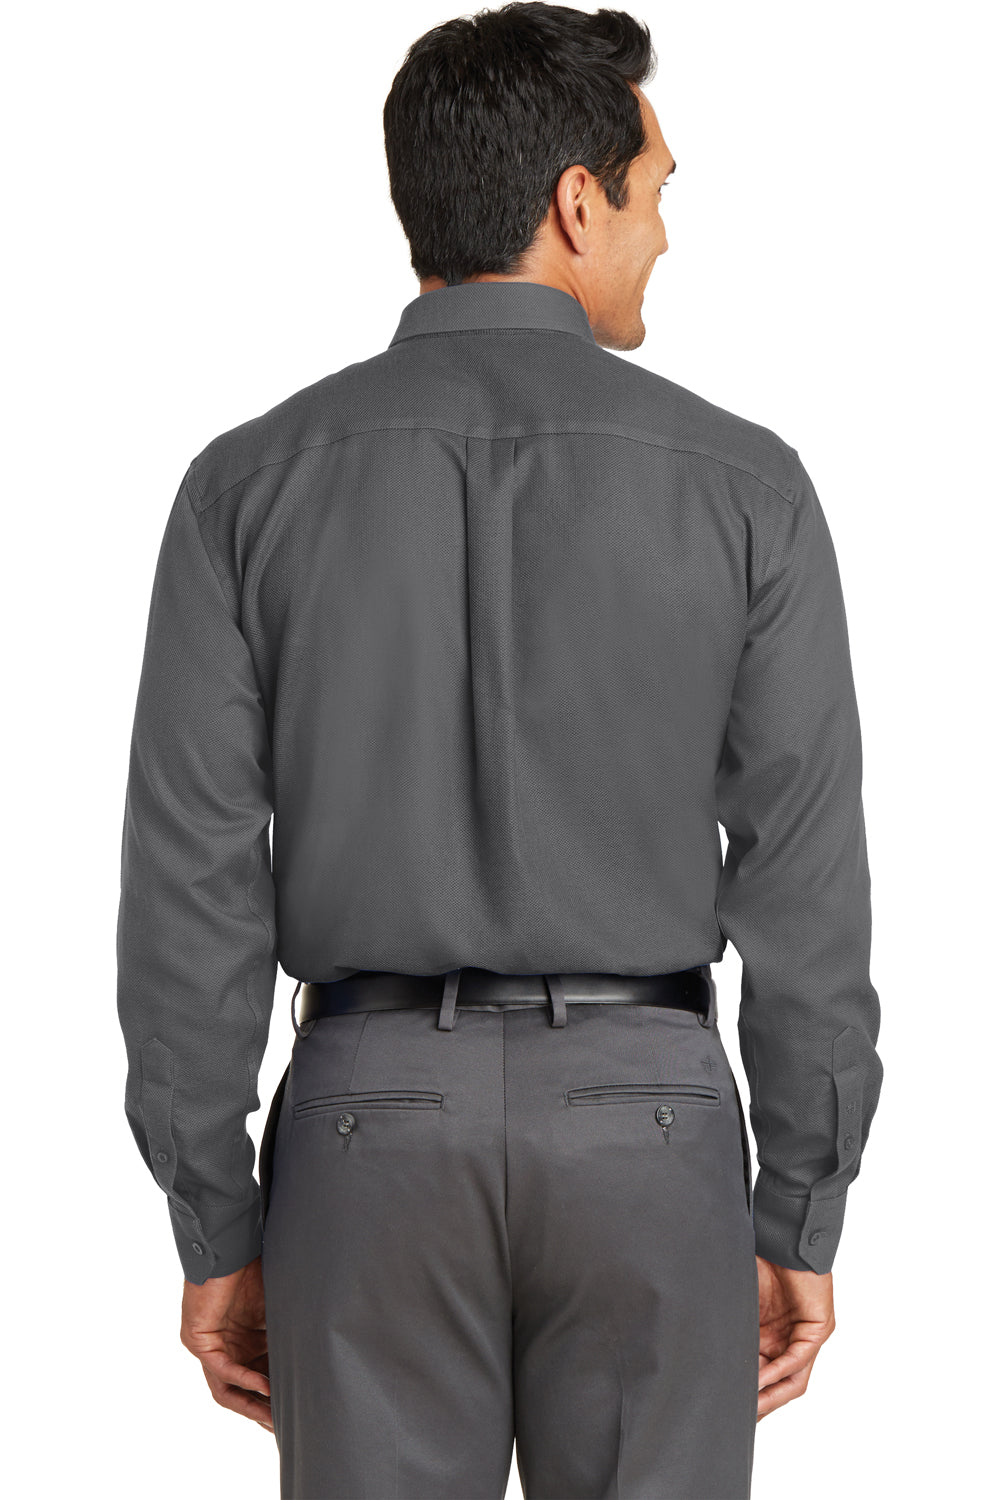 Red House RH76 Mens Wrinkle Resistant Long Sleeve Button Down Shirt w/ Pocket Charcoal Grey Back